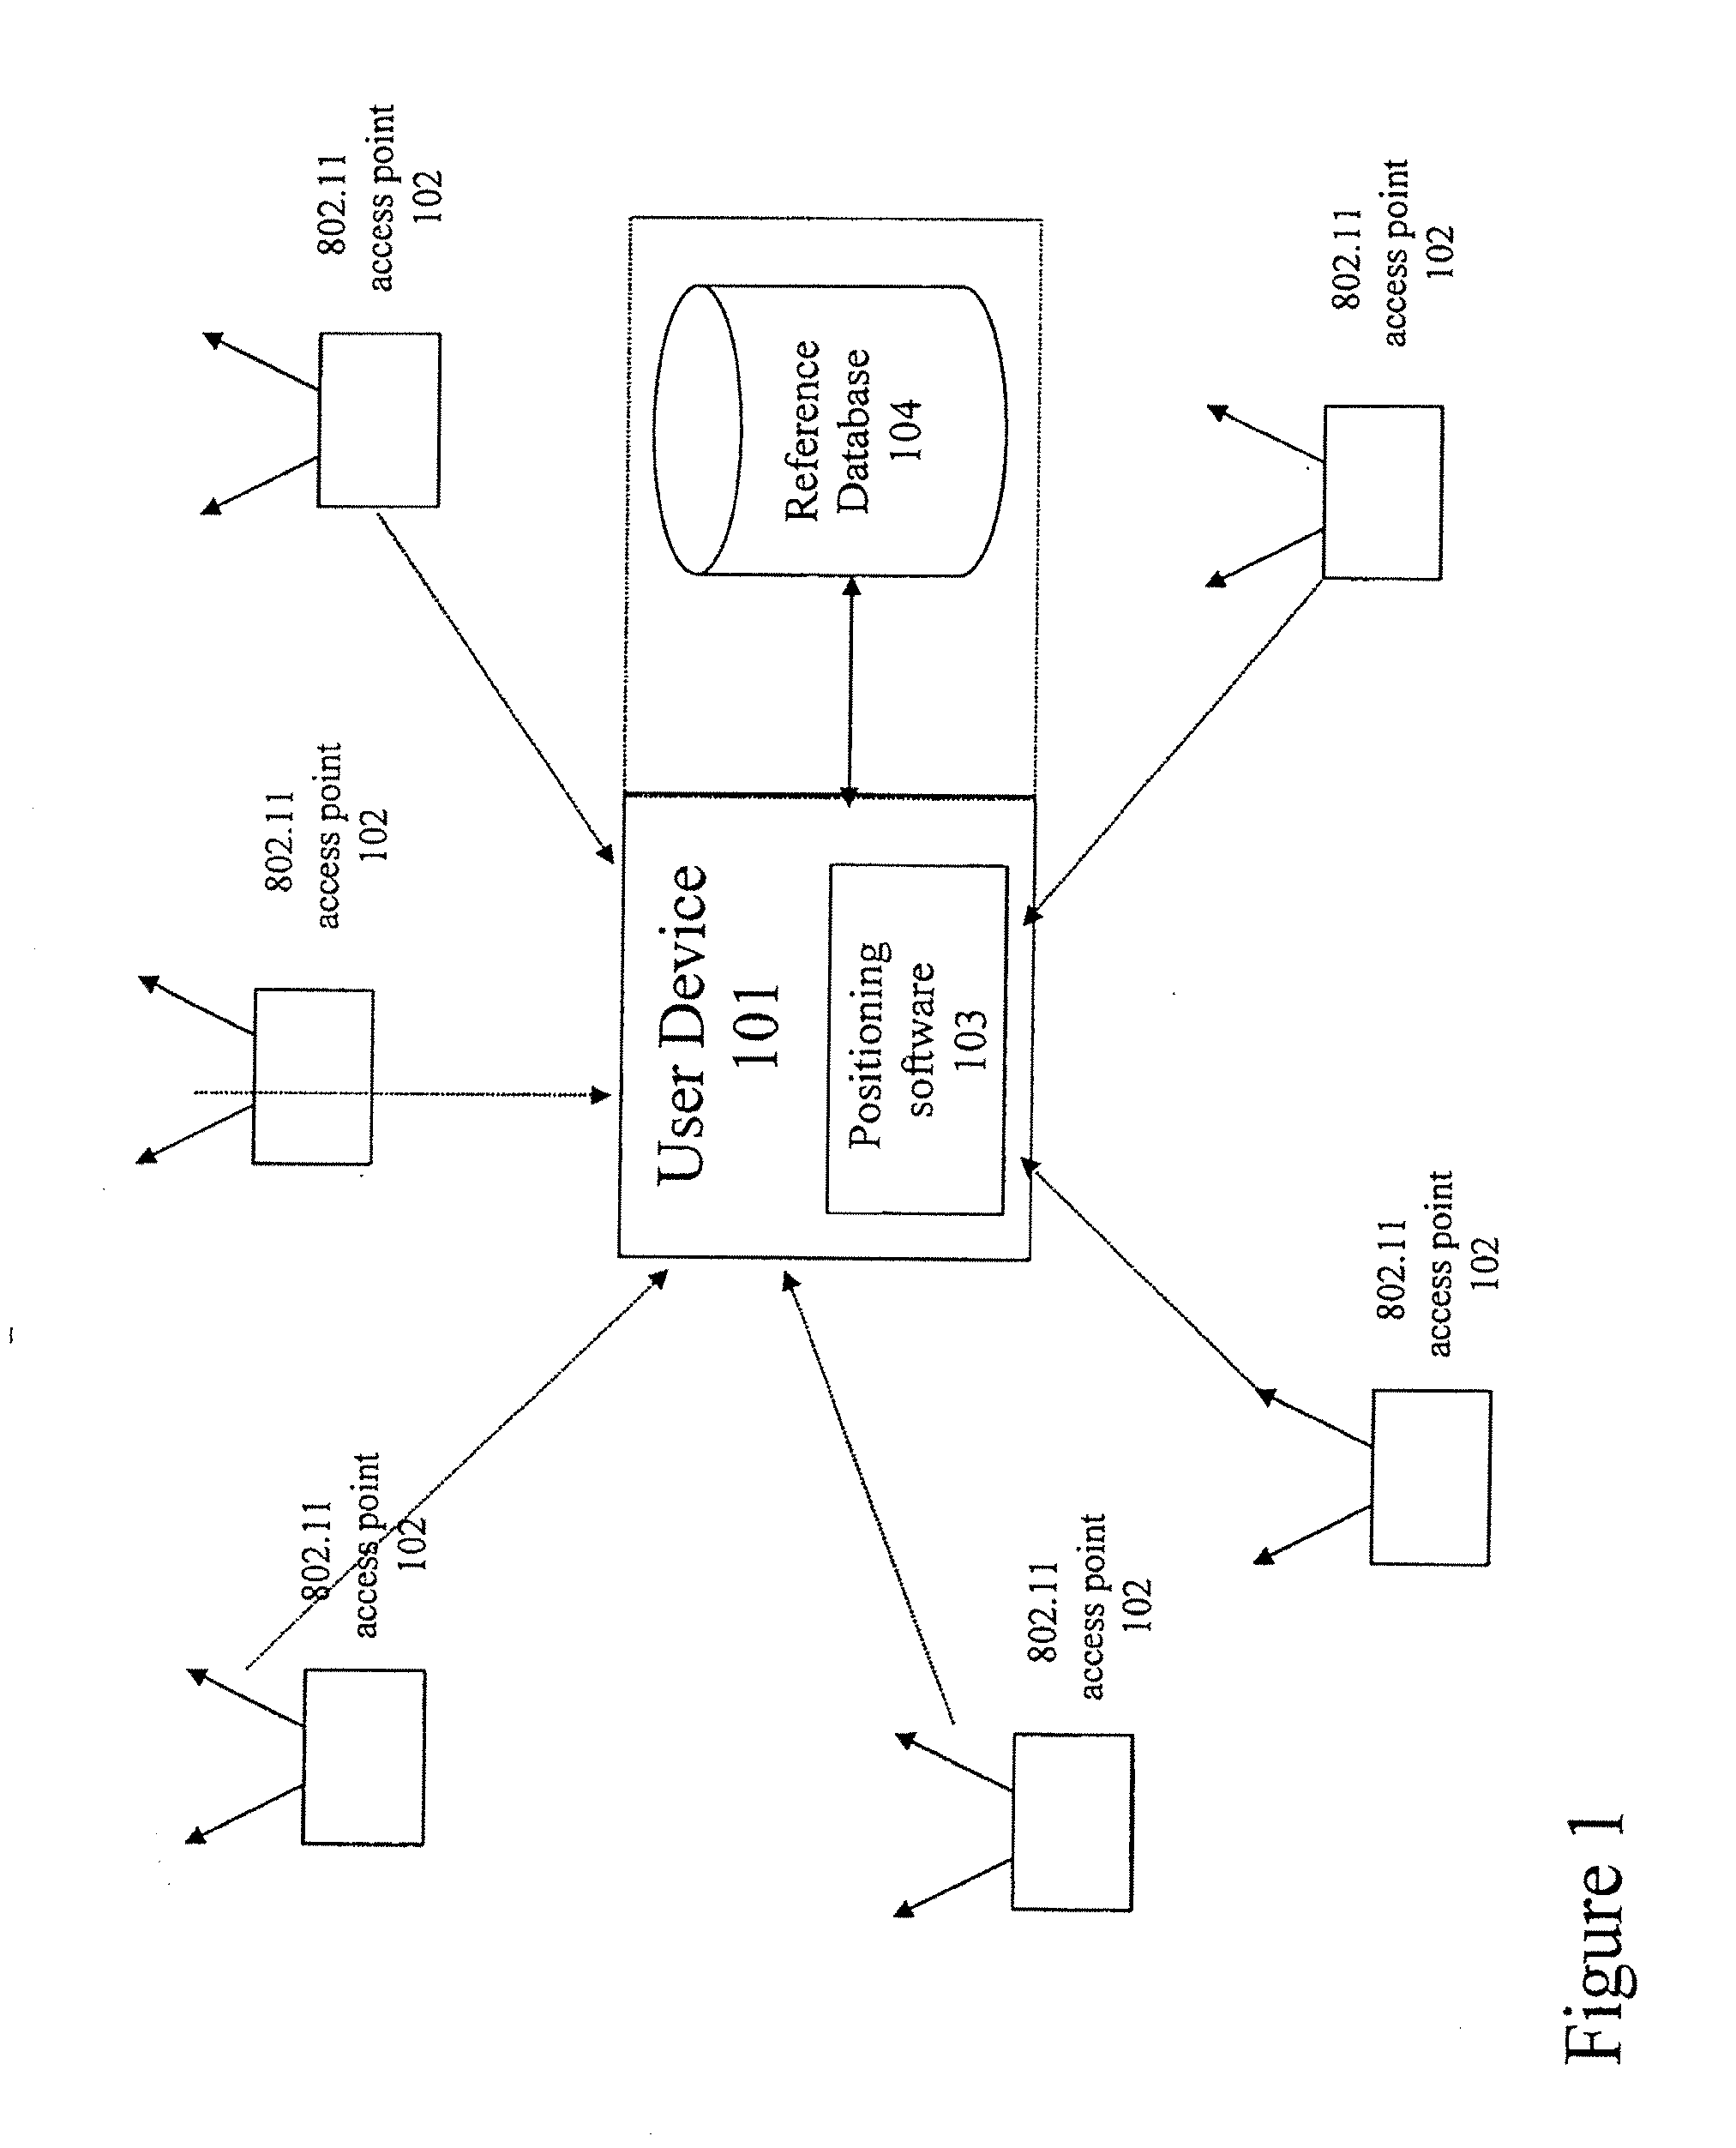 Method and system for selecting and providing a relevant subset of wi-fi location information to a mobile client device so the client device may estimate its position with efficient utilization of resources